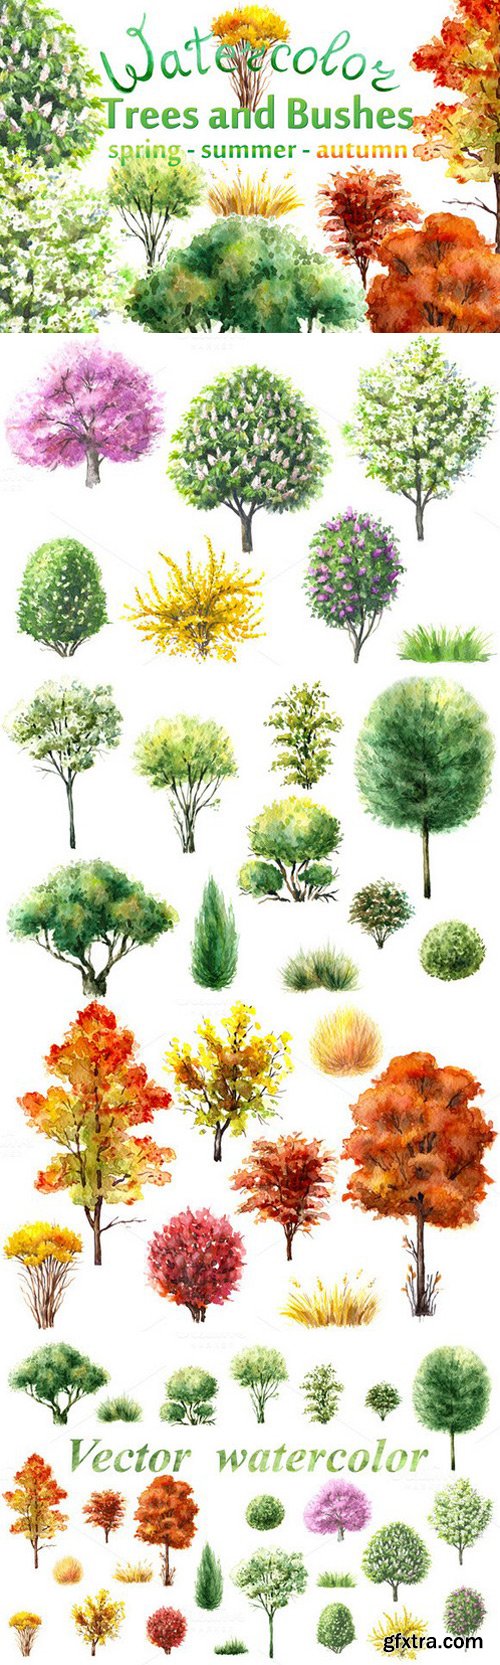 CM - Watercolor Trees and Bushes 657025